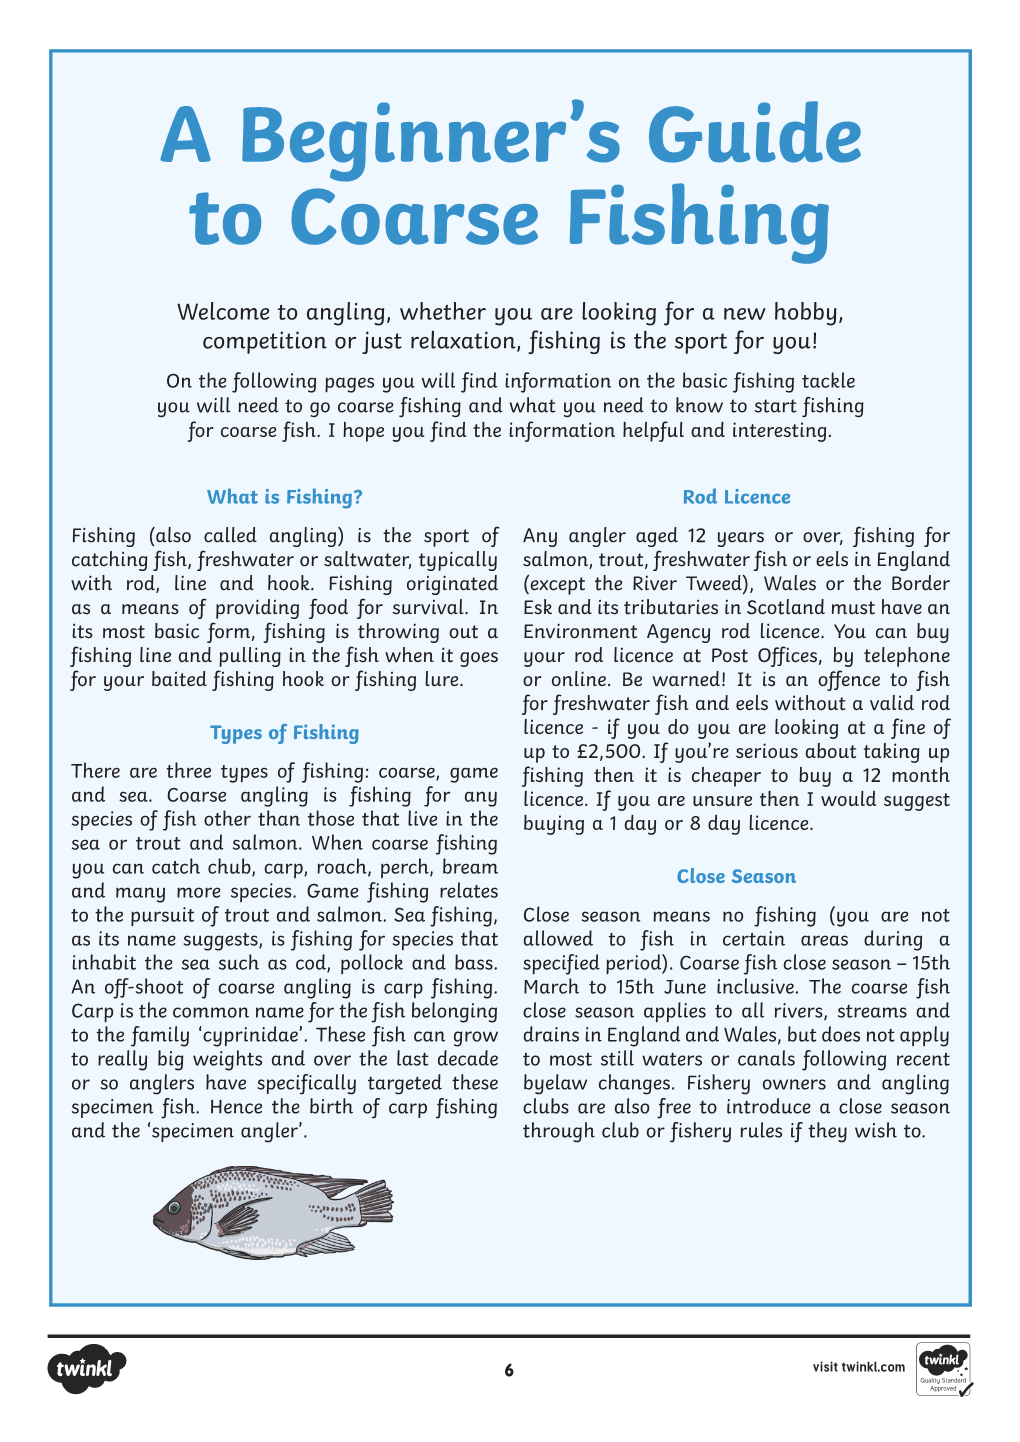 A Beginner's Guide to Coarse Fishing